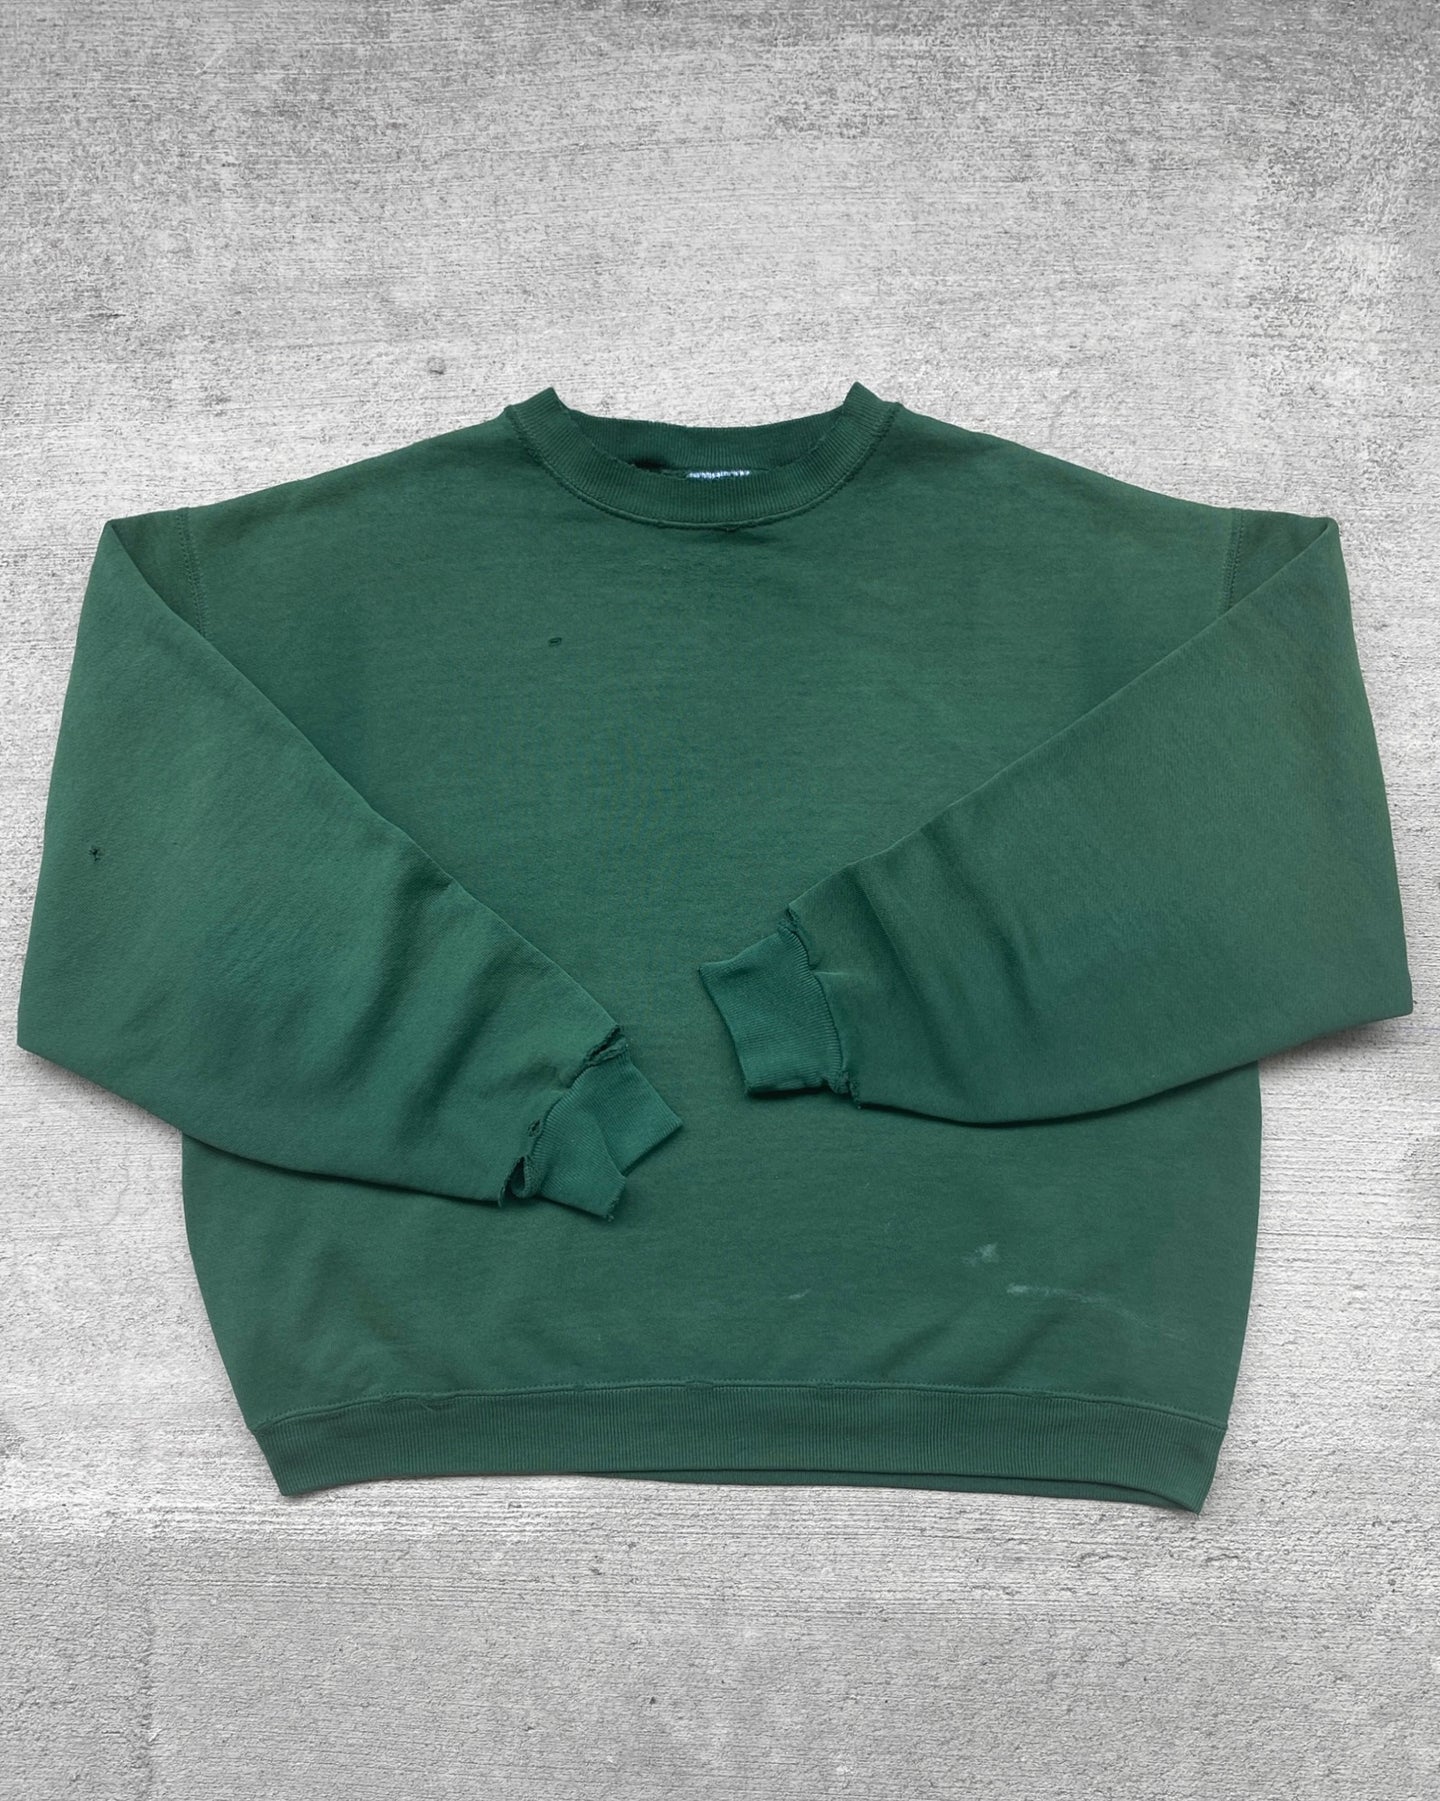 1990s Sun Faded and Distressed Forest Green Crewneck - Size X-Large